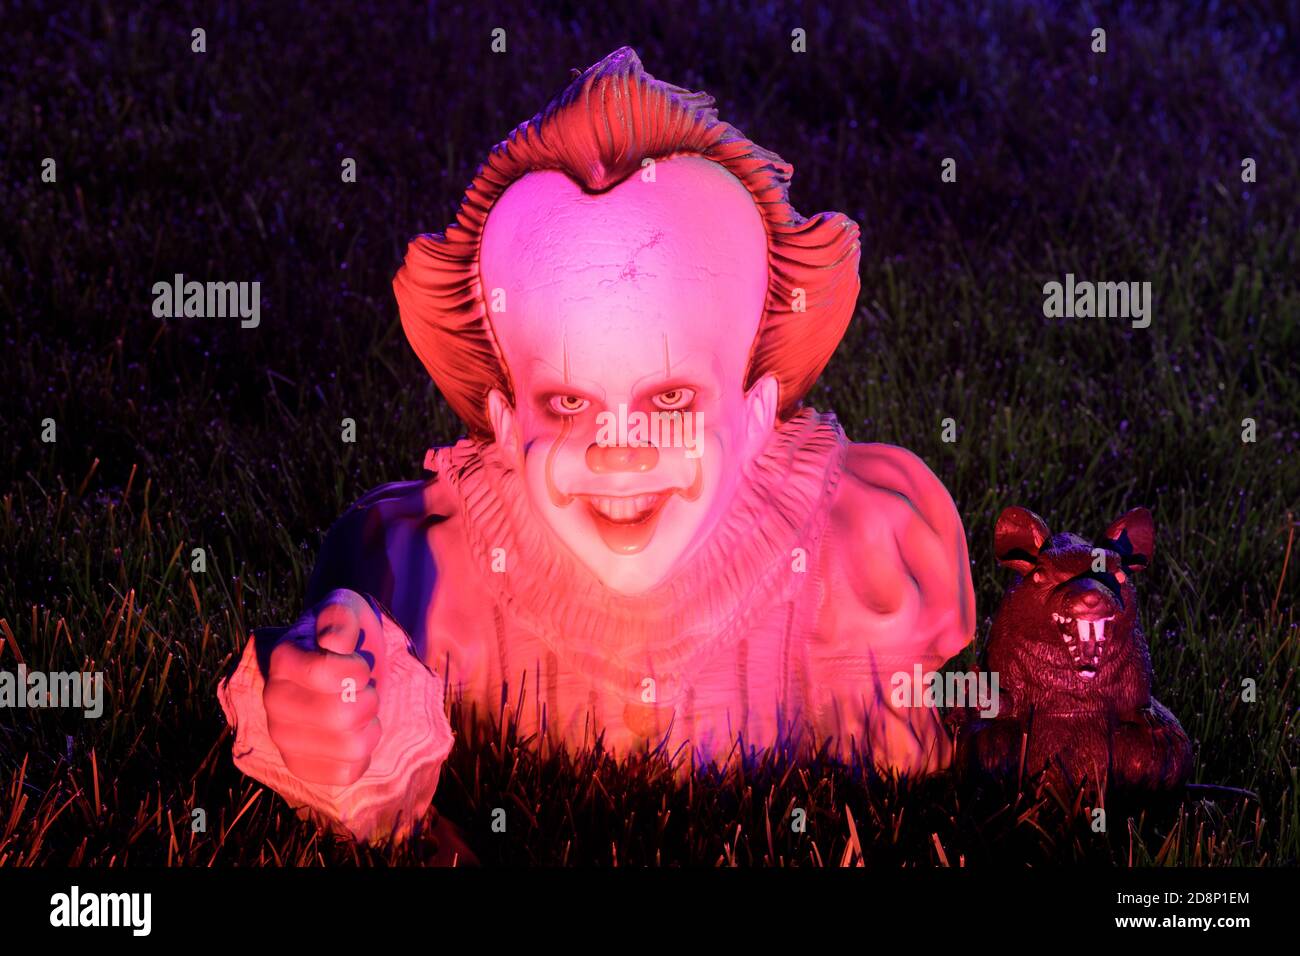 Pennywise The Clown from the movie It by Stephen King Stock Photo